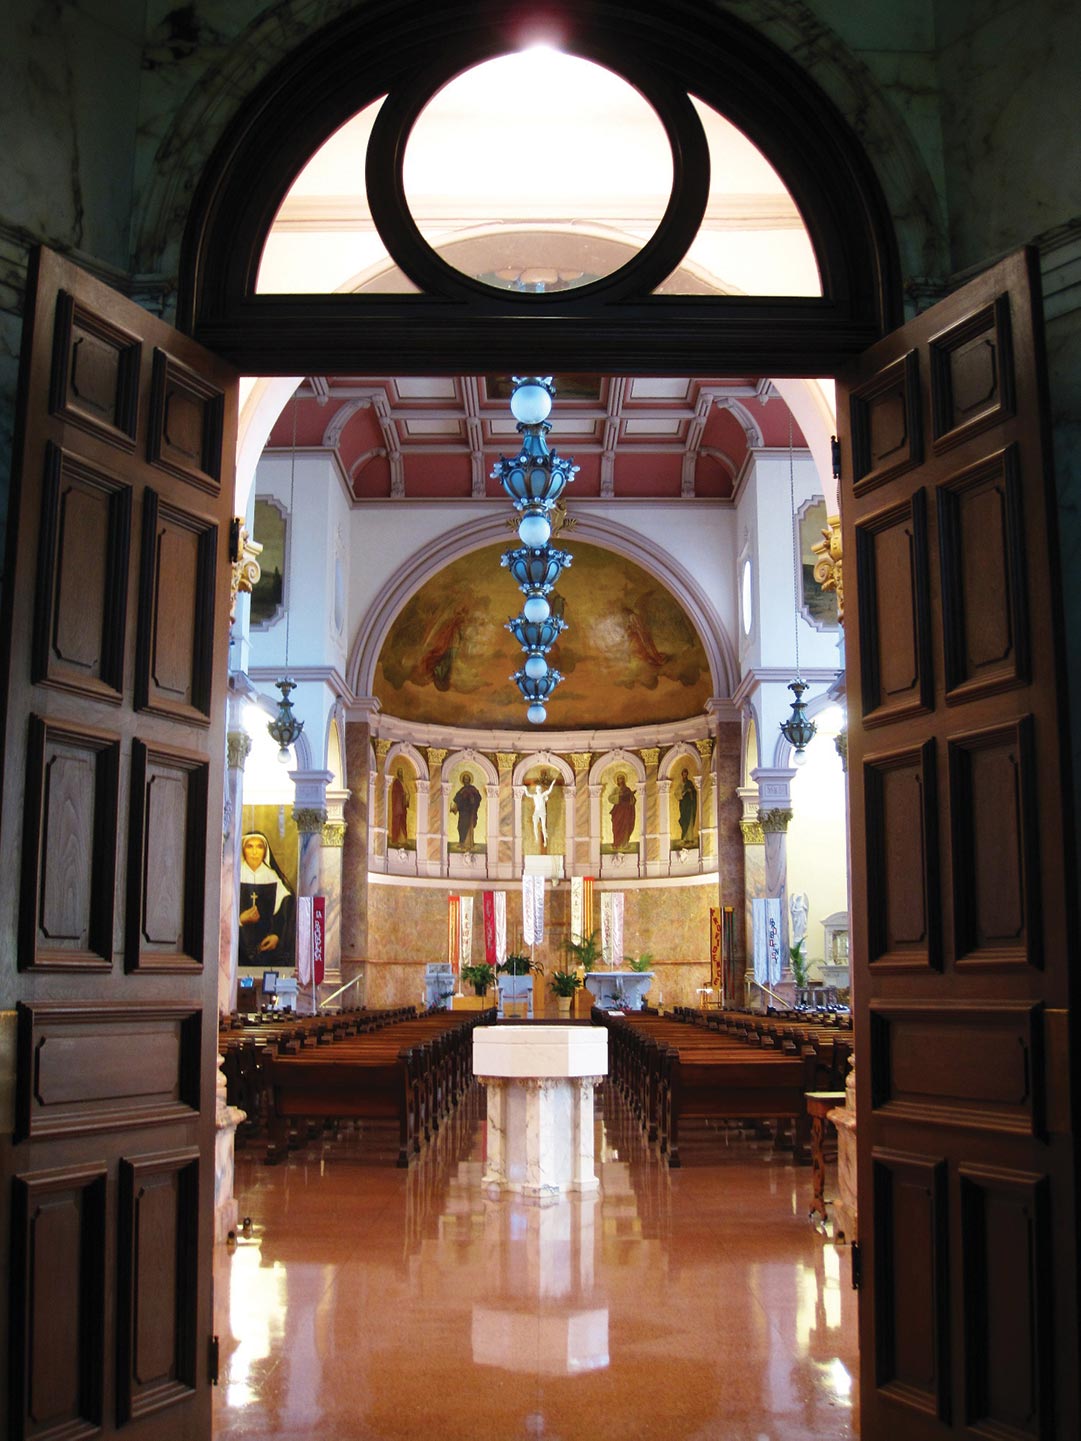 Interior view of the Church of the Immaculate Conception